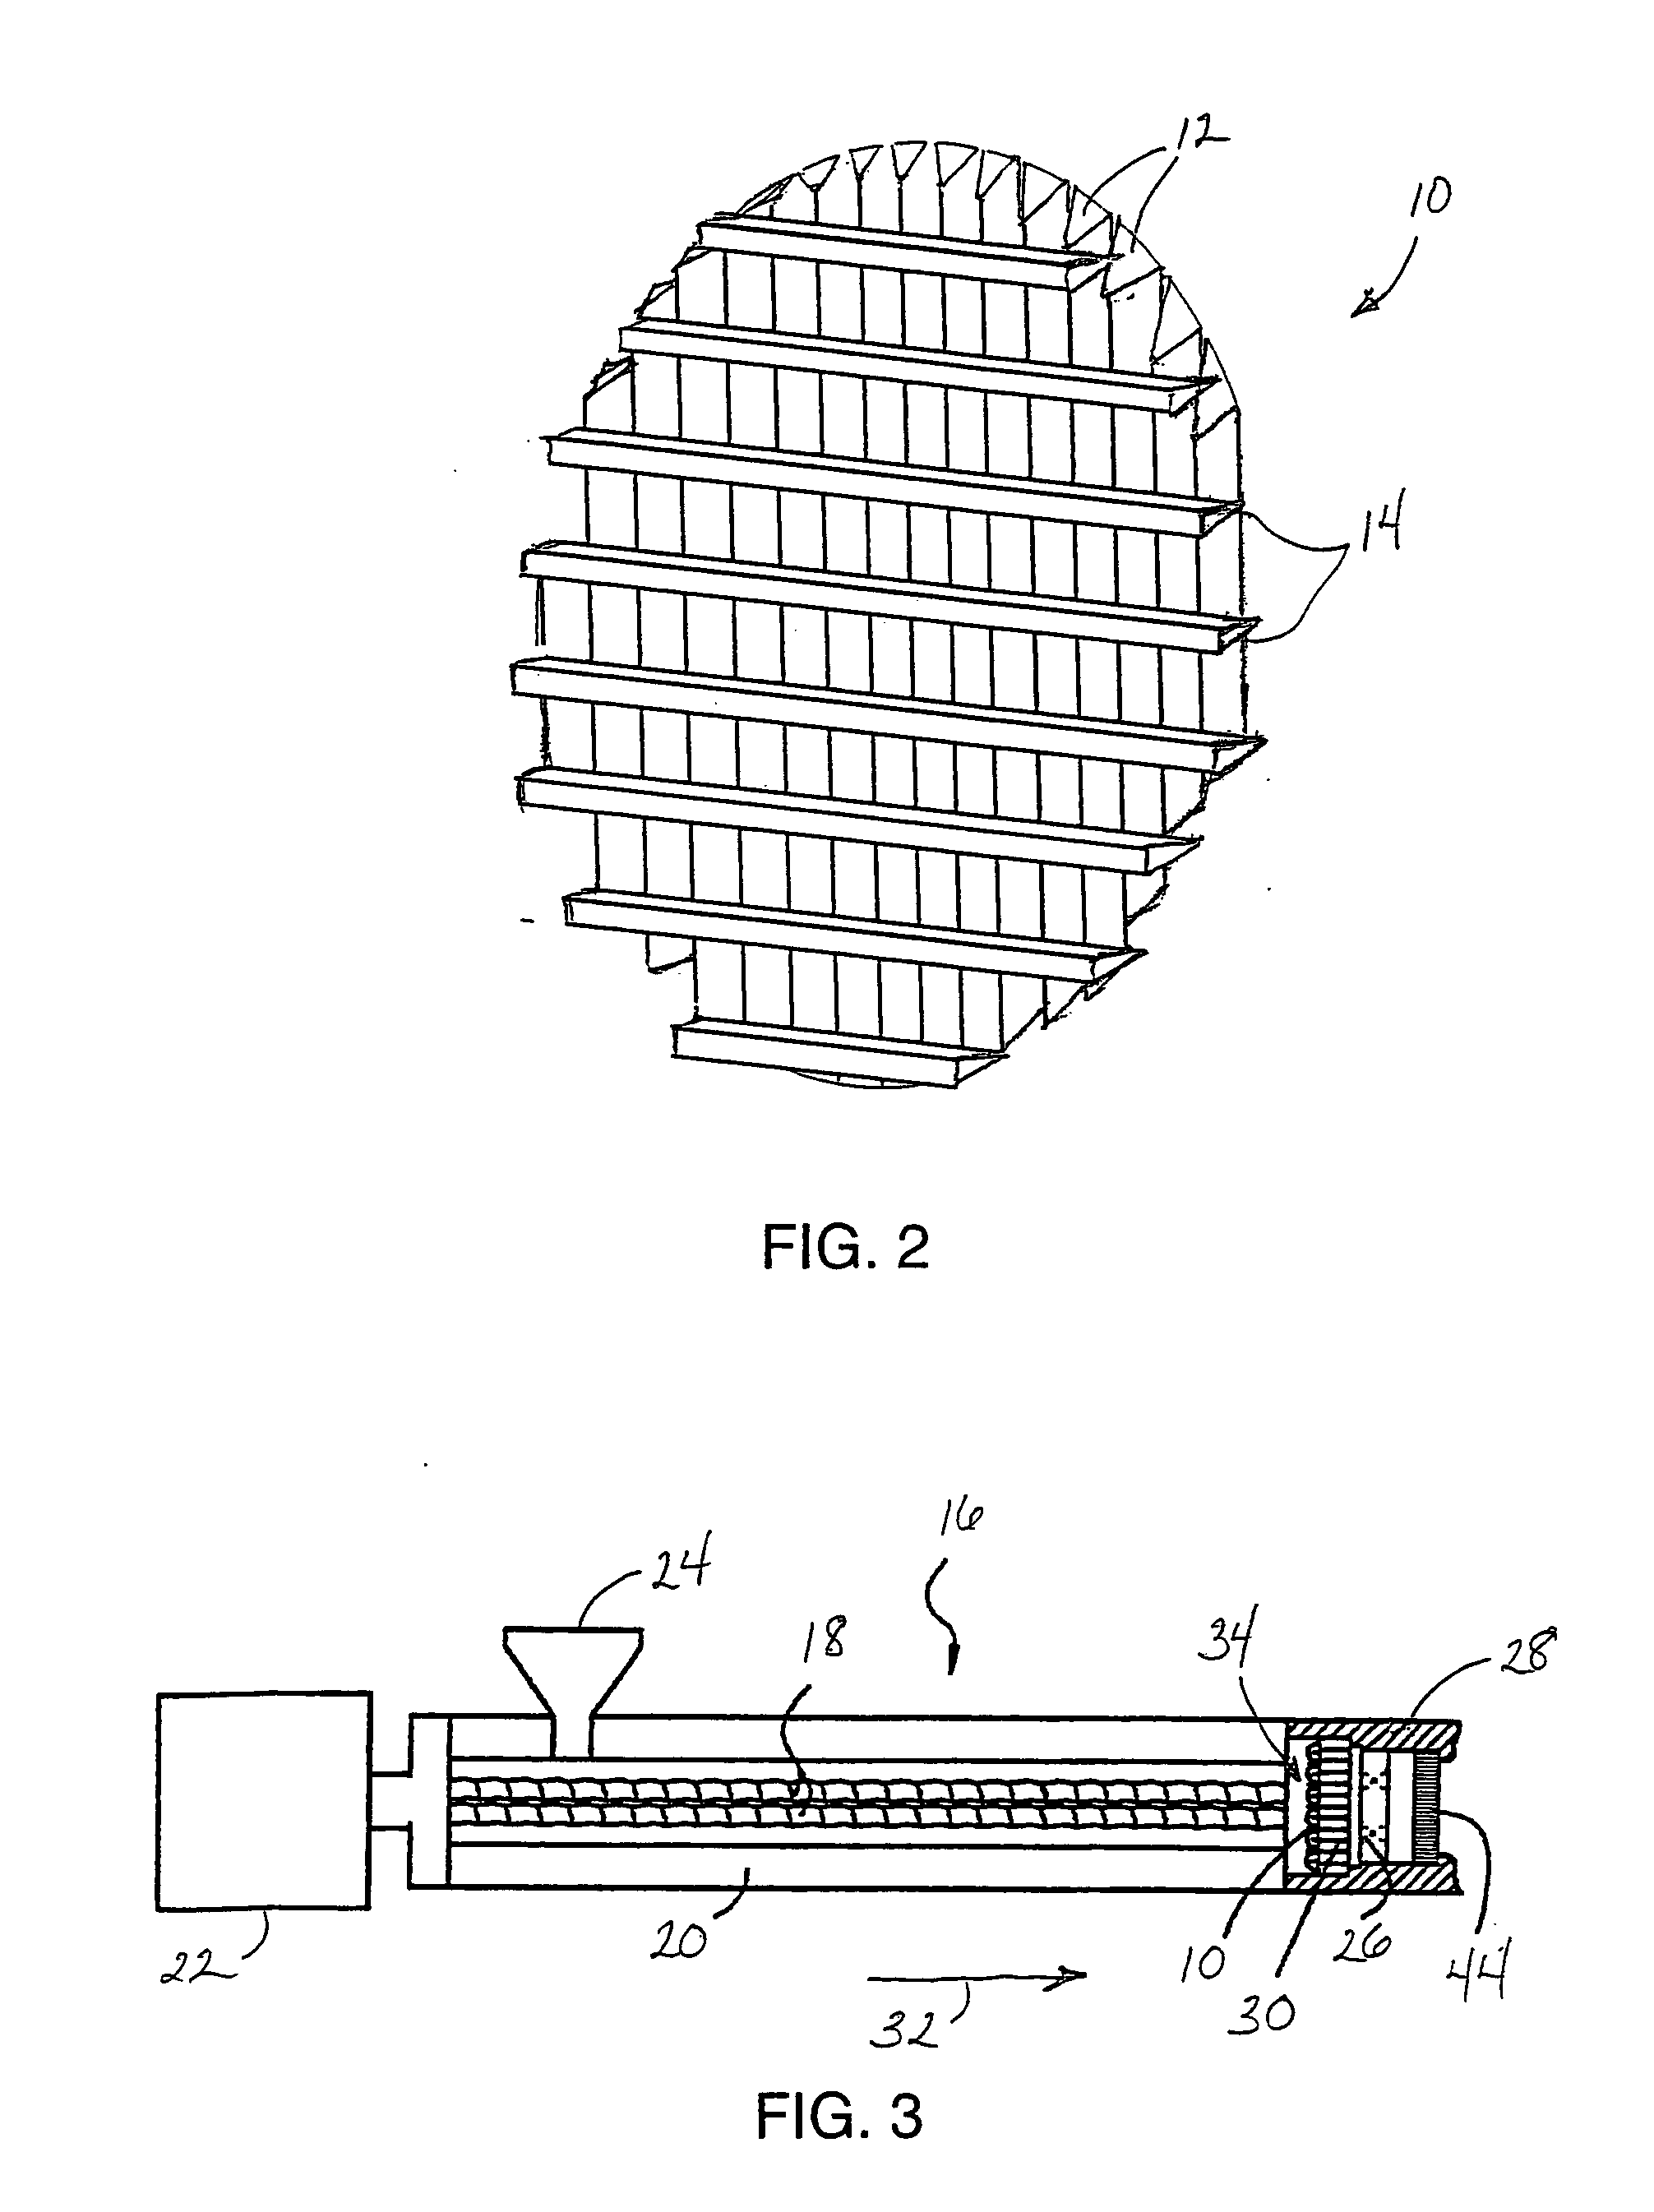 Method and apparatus for extruding a ceramic material